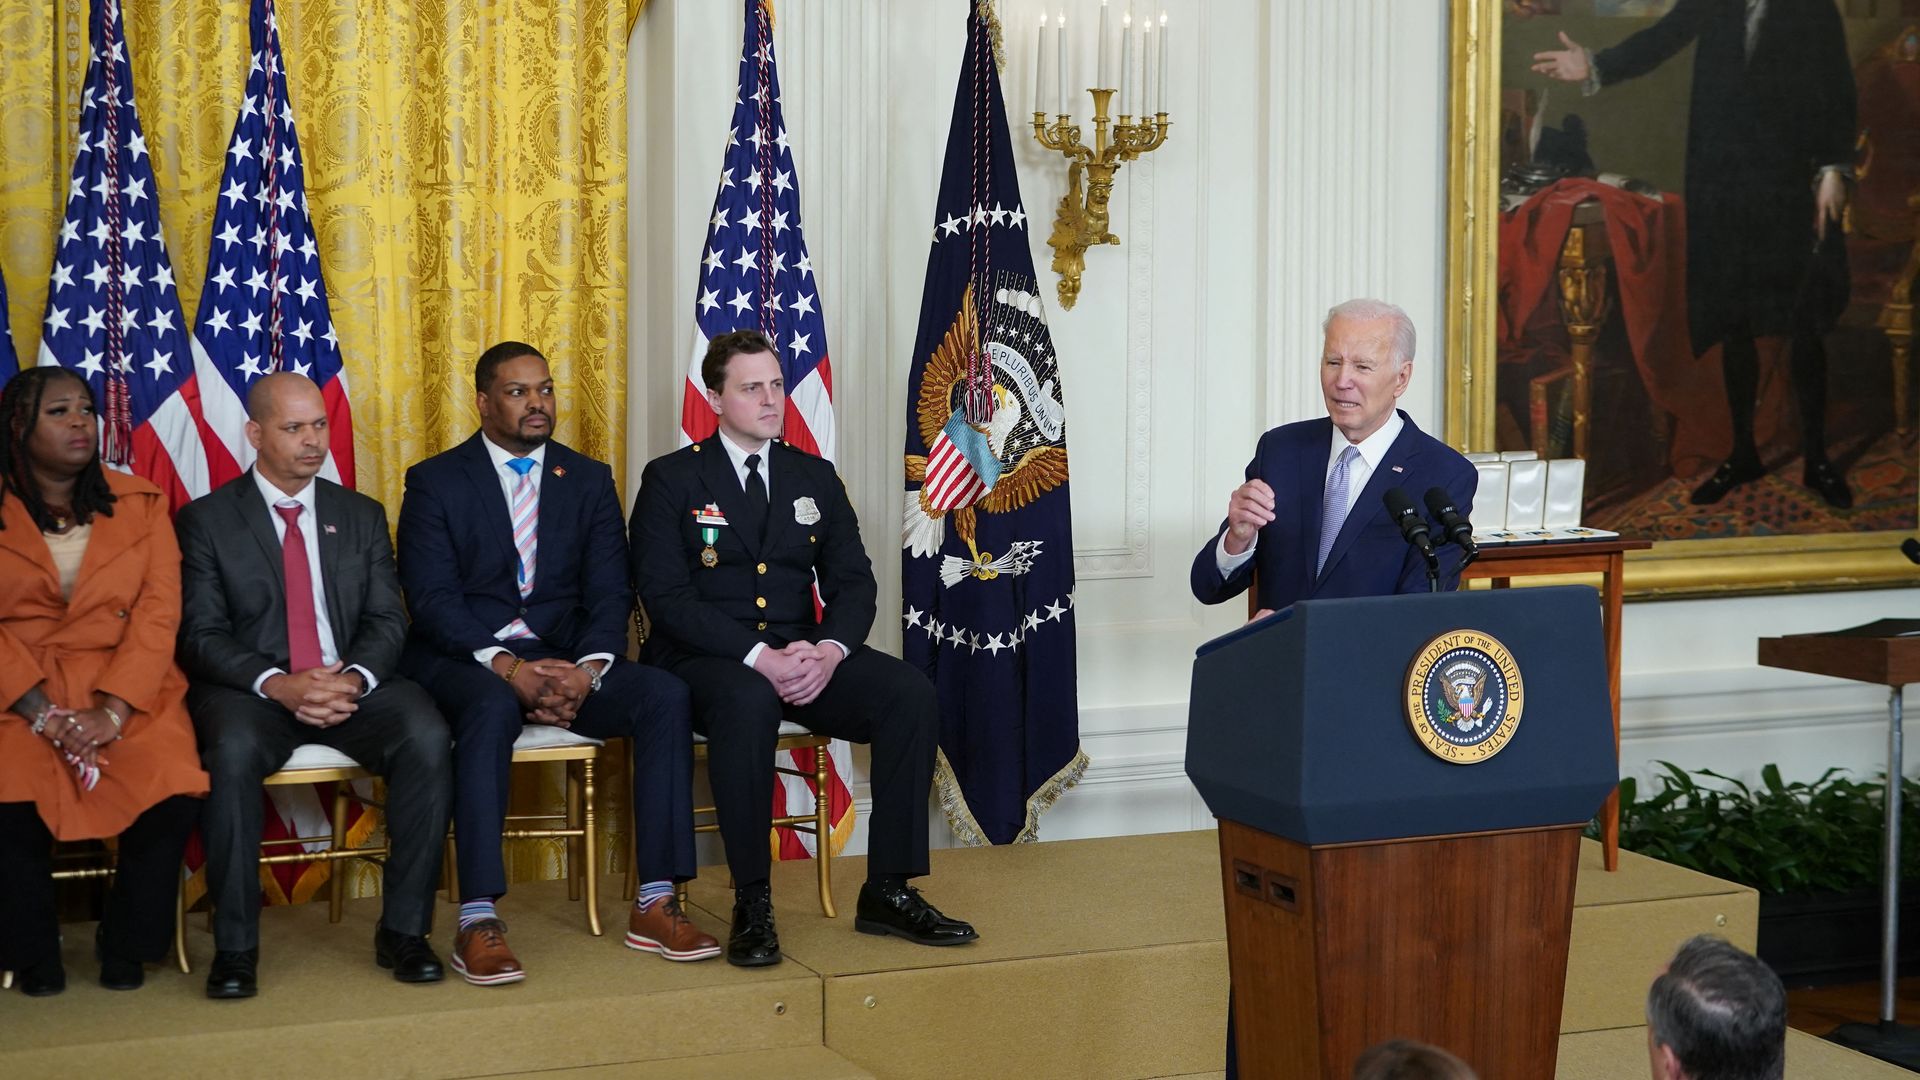 US President Joe Biden (R) speaks on the second anniversary of the January 6, 2021 attack on the US Capitol, at the White House in Washington, DC.